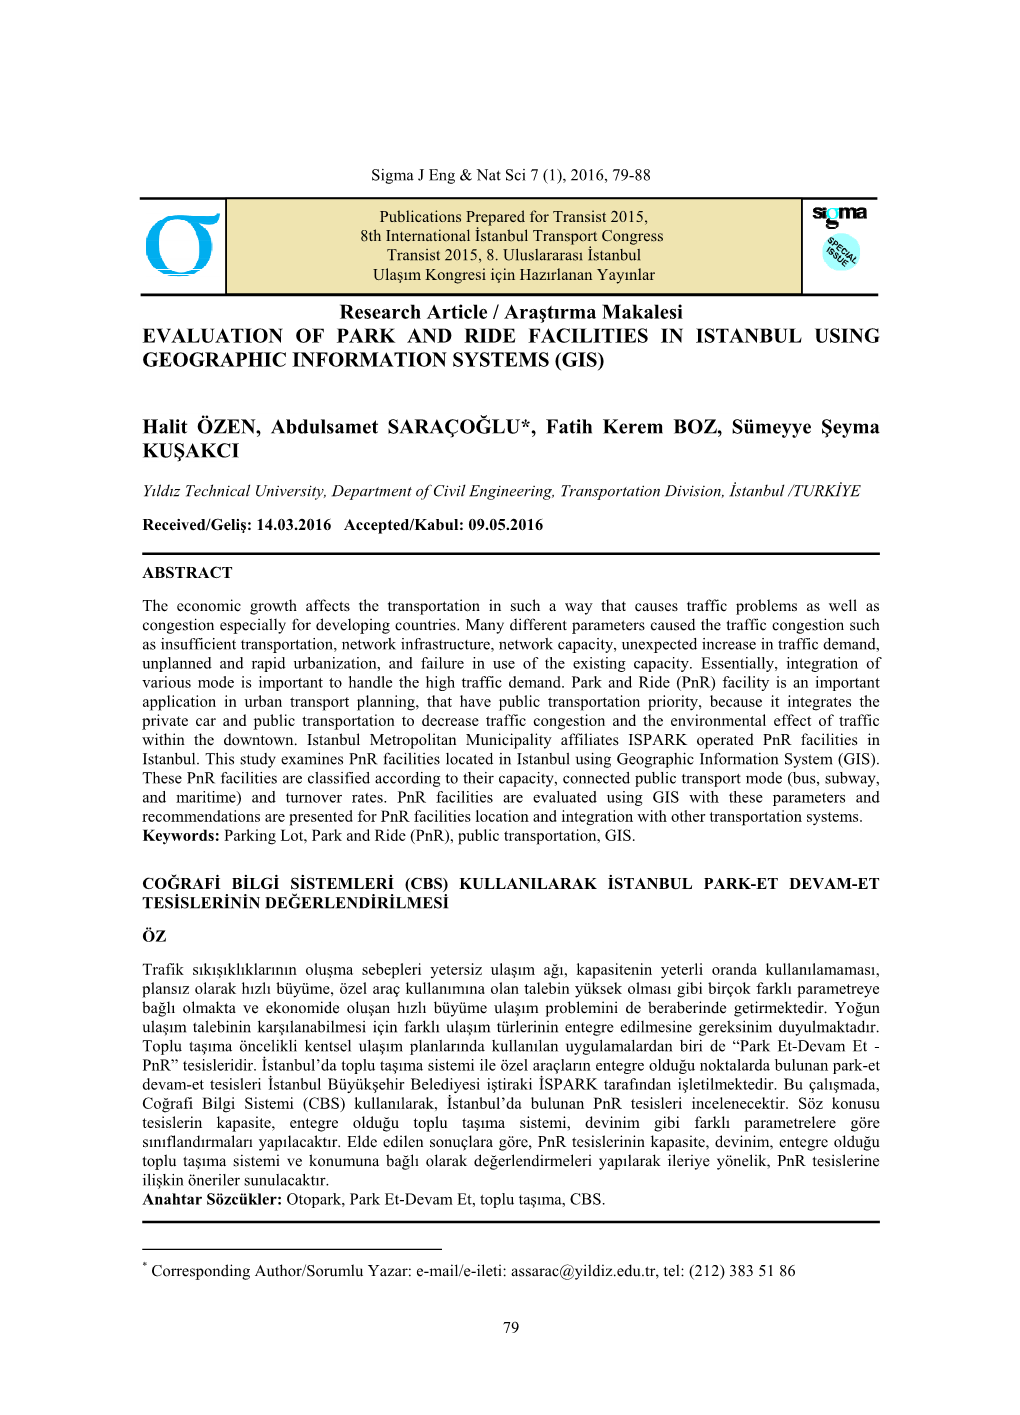 Research Article / Araştırma Makalesi EVALUATION of PARK and RIDE FACILITIES in ISTANBUL USING GEOGRAPHIC INFORMATION SYSTEMS (GIS)